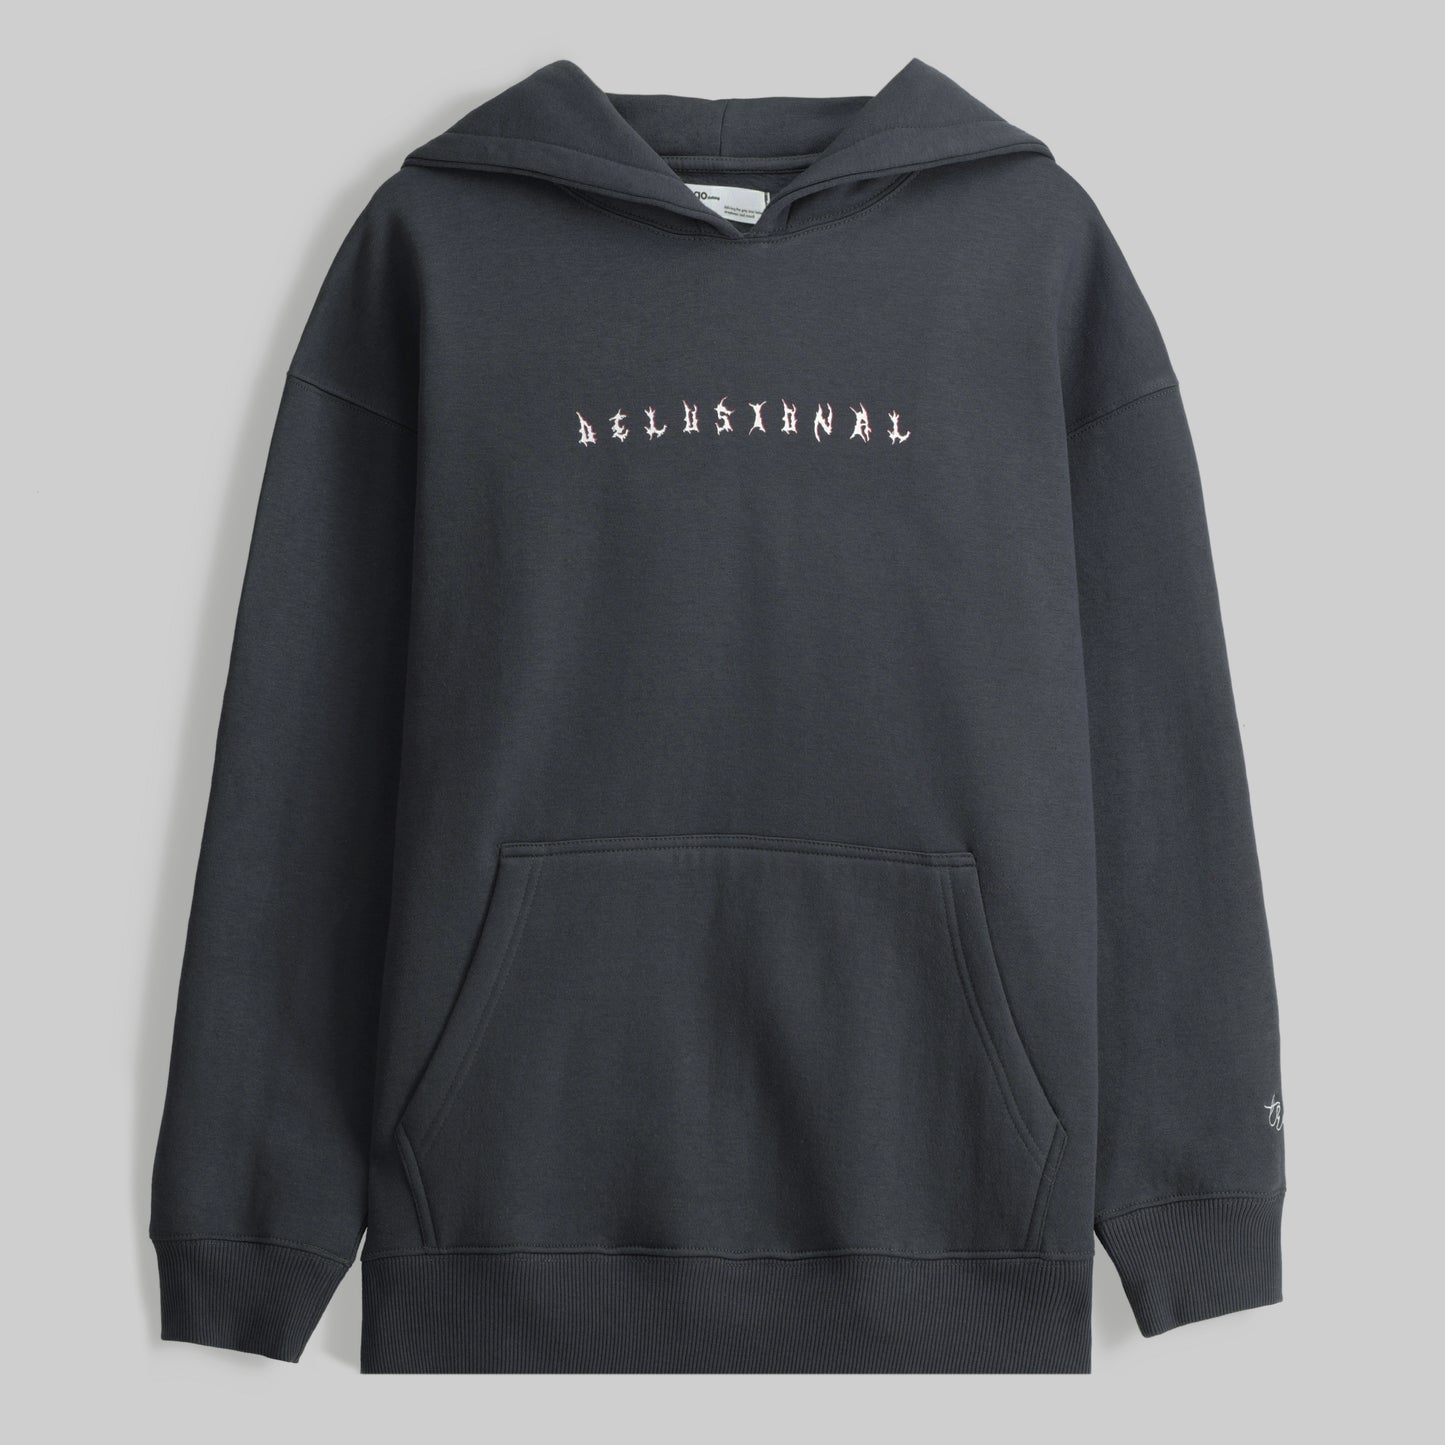 Delusional Graphic Hoodie